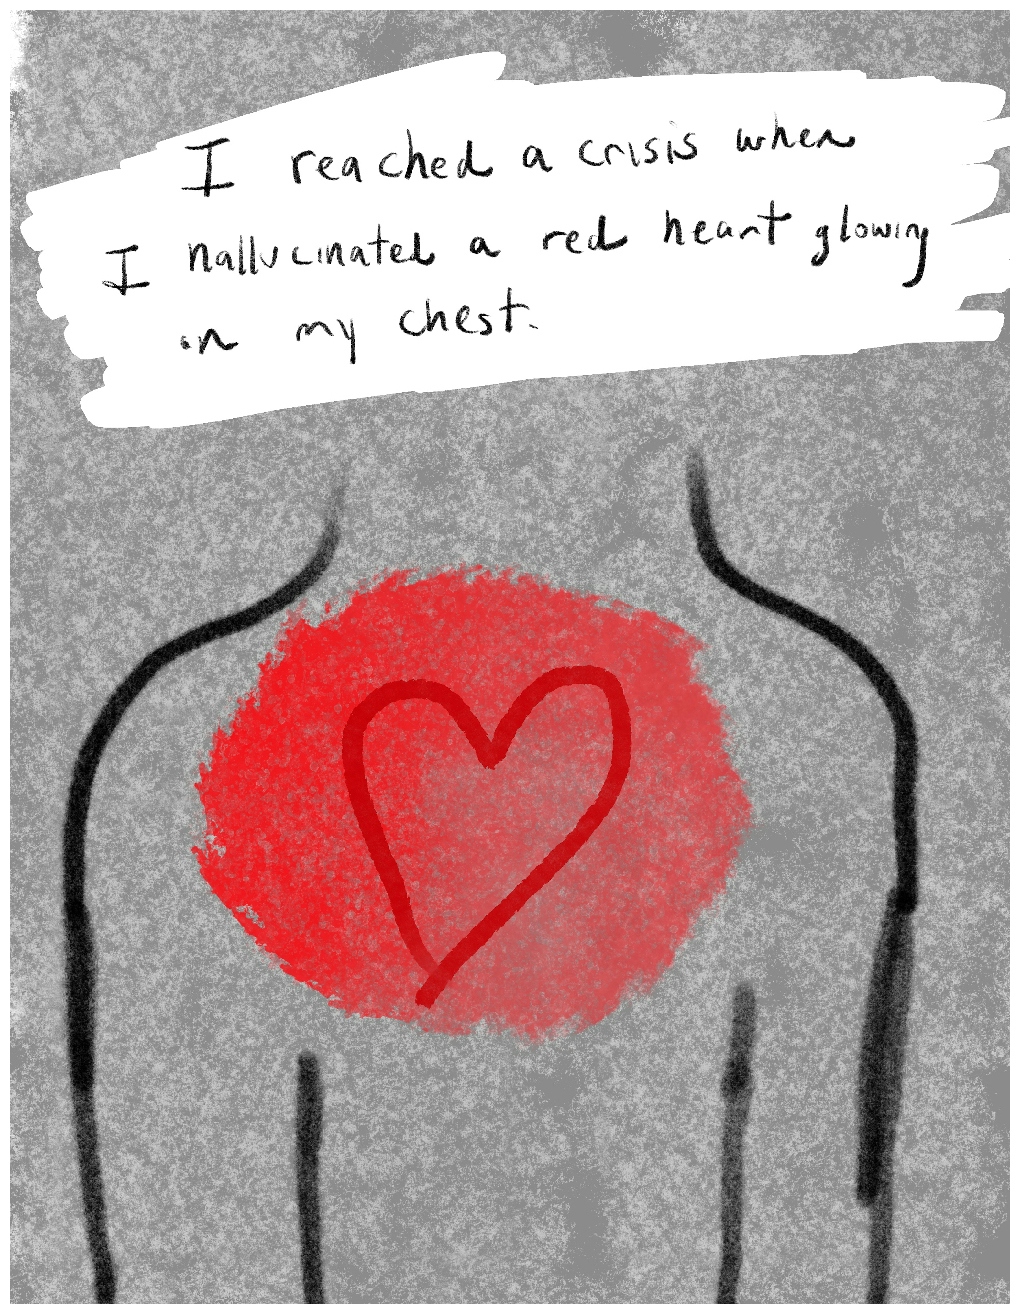 Panel 1 of a four-panel comic called 'I was hallucinating', consisting of thick black line drawing on a mottled grey background. A basic outline of the top half of a human torso, arms by its side, without a head fills three quarters of the panel. In the centre of the chest is a red painted circle with a red heart shape inside it. At the top of the panel hand written text against a white background reads: "I reached a crisis when I hallucinated a red heart glowing in my chest."